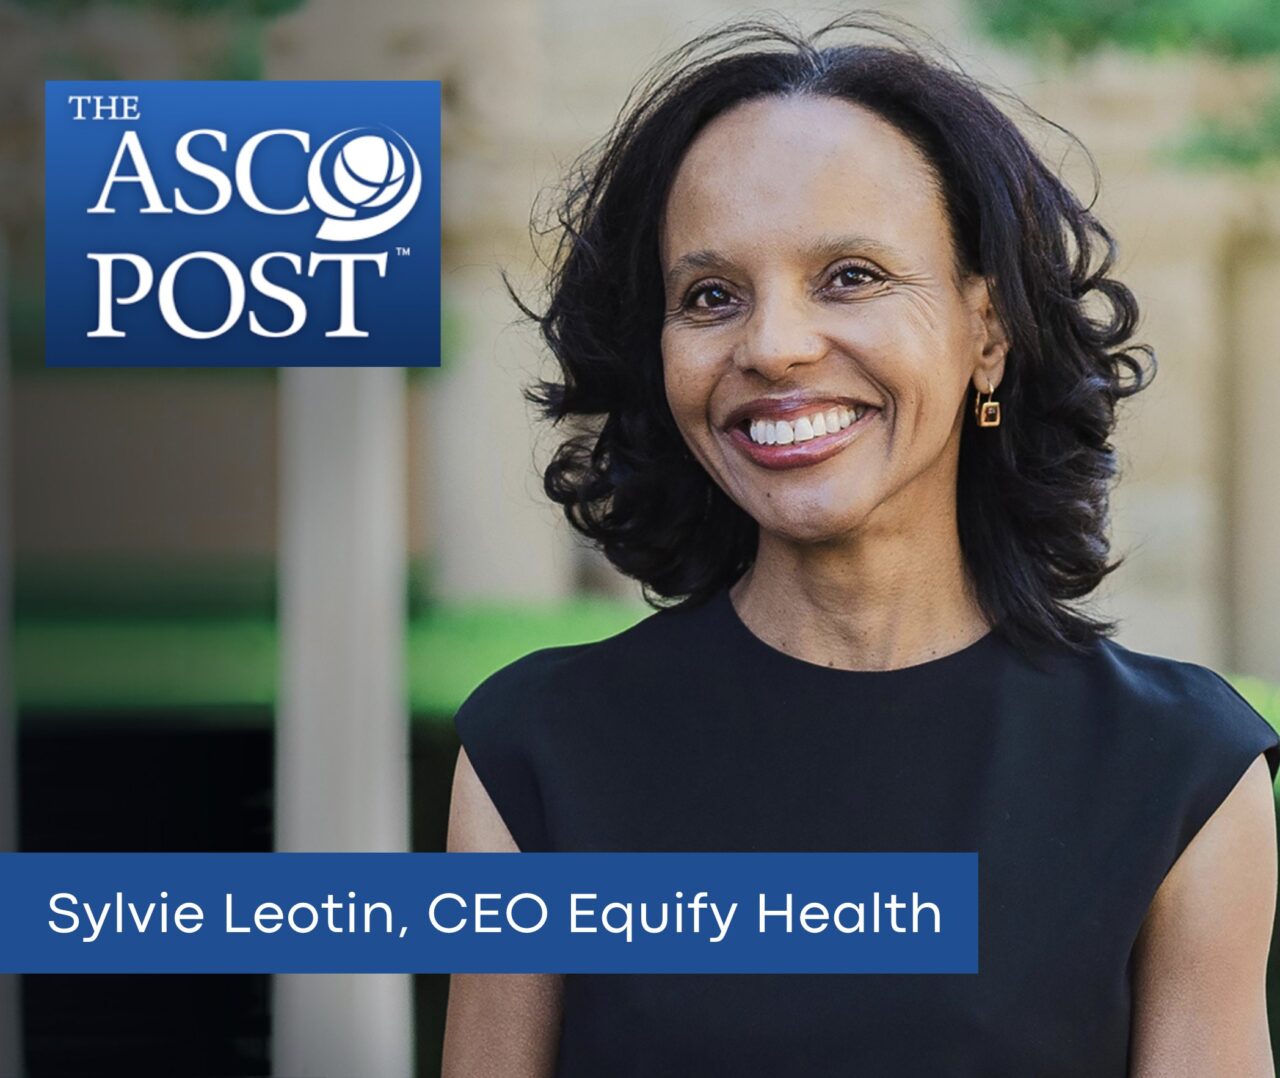 Sylvie Leotin: The pain I faced during my cancer motivated me to use my innovation expertise to develop solutions to improve healthcare delivery for everyone